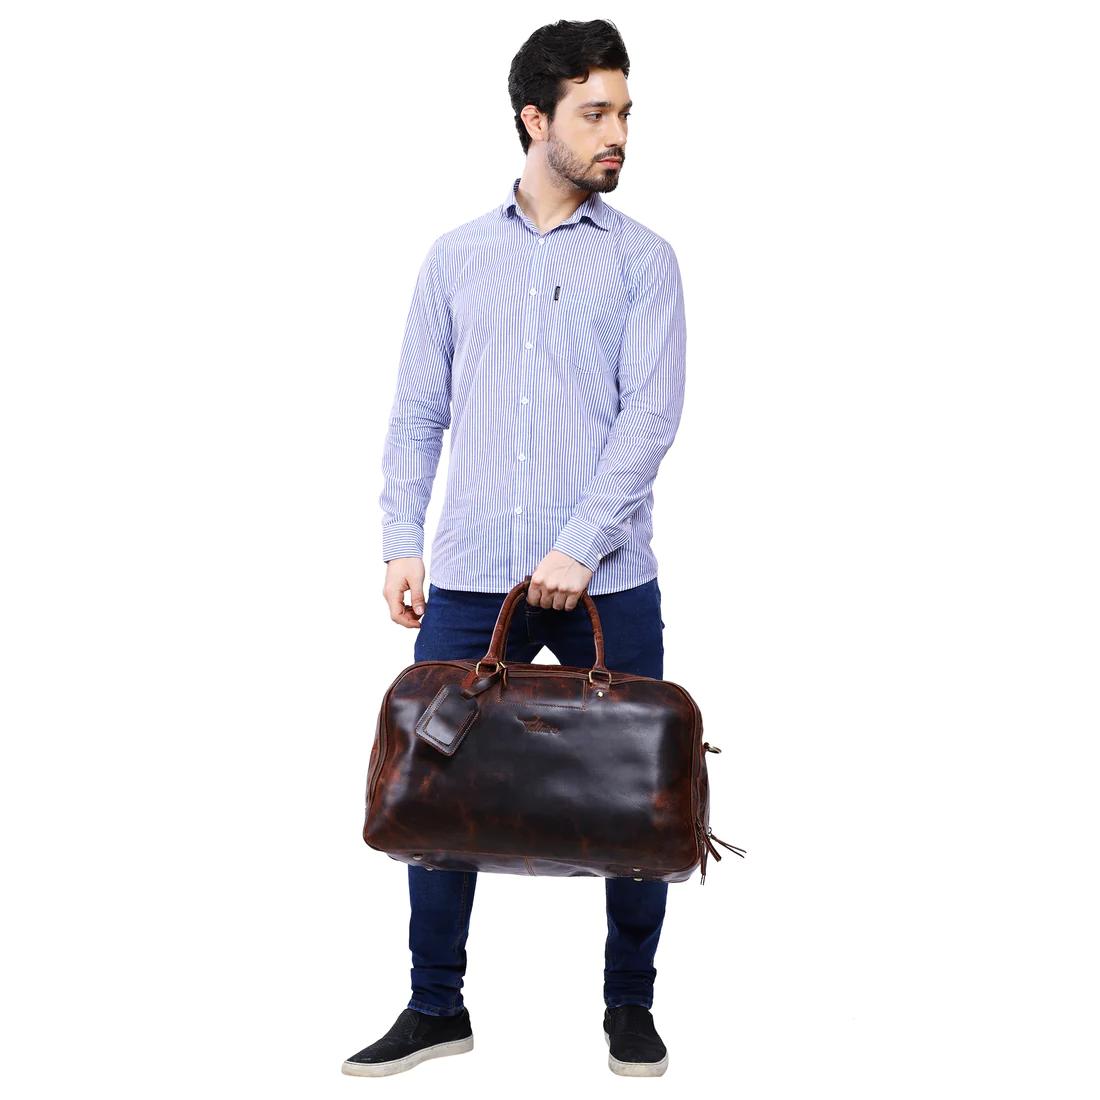 Leather Square Duffle Bag | Light Brown